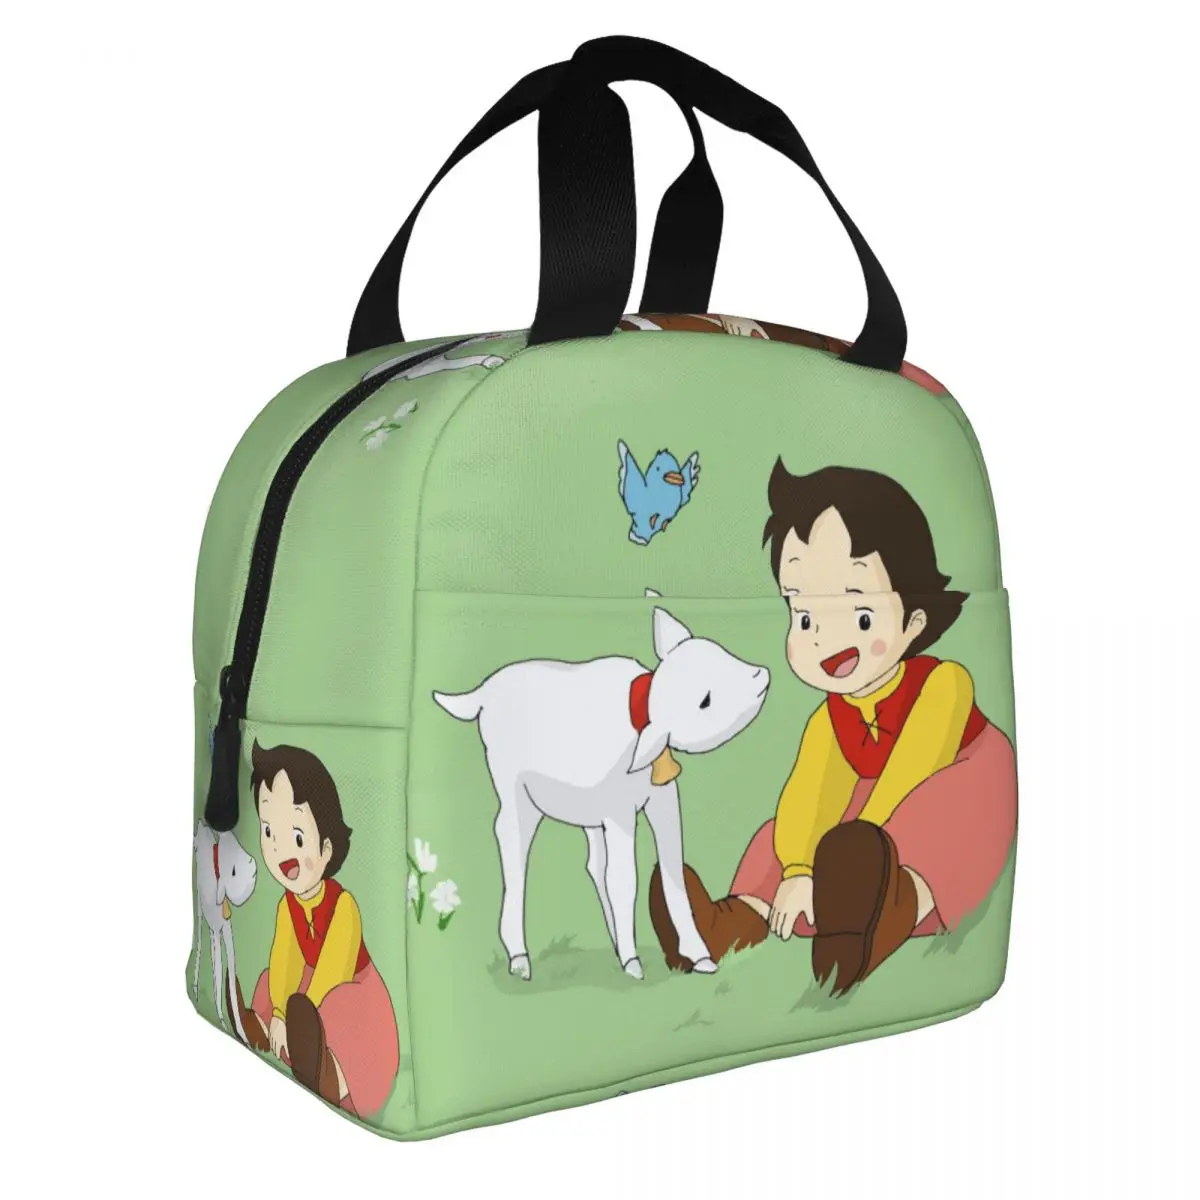 

Heidi And Litle Goat Thermal Insulated Lunch Bags Women Resuable Lunch Tote for Kids School Children Storage Food Bento Box